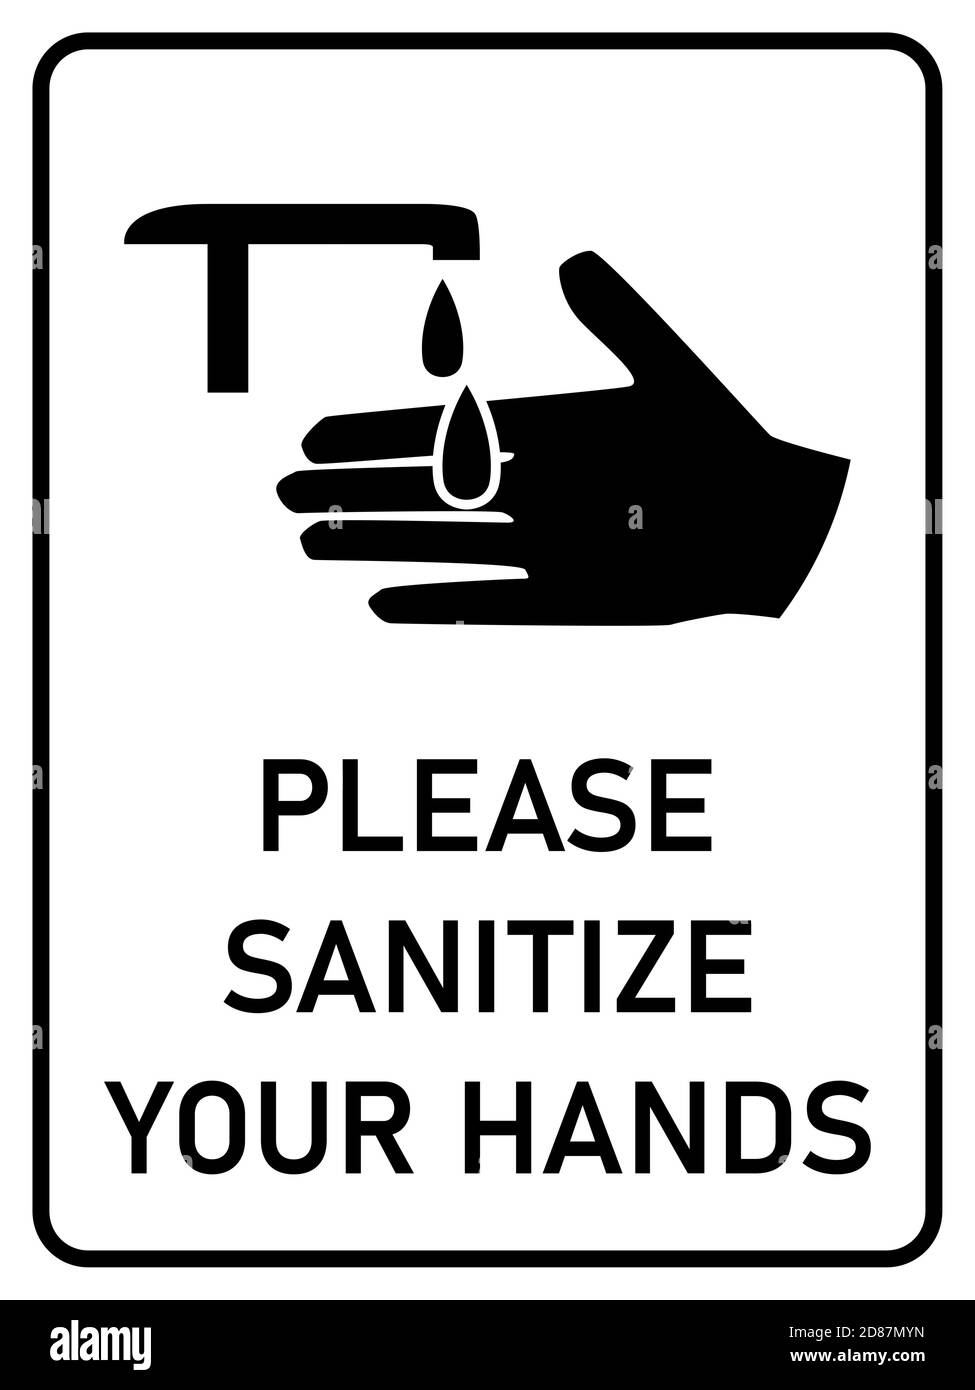 Please sanitize Cut Out Stock Images & Pictures - Alamy